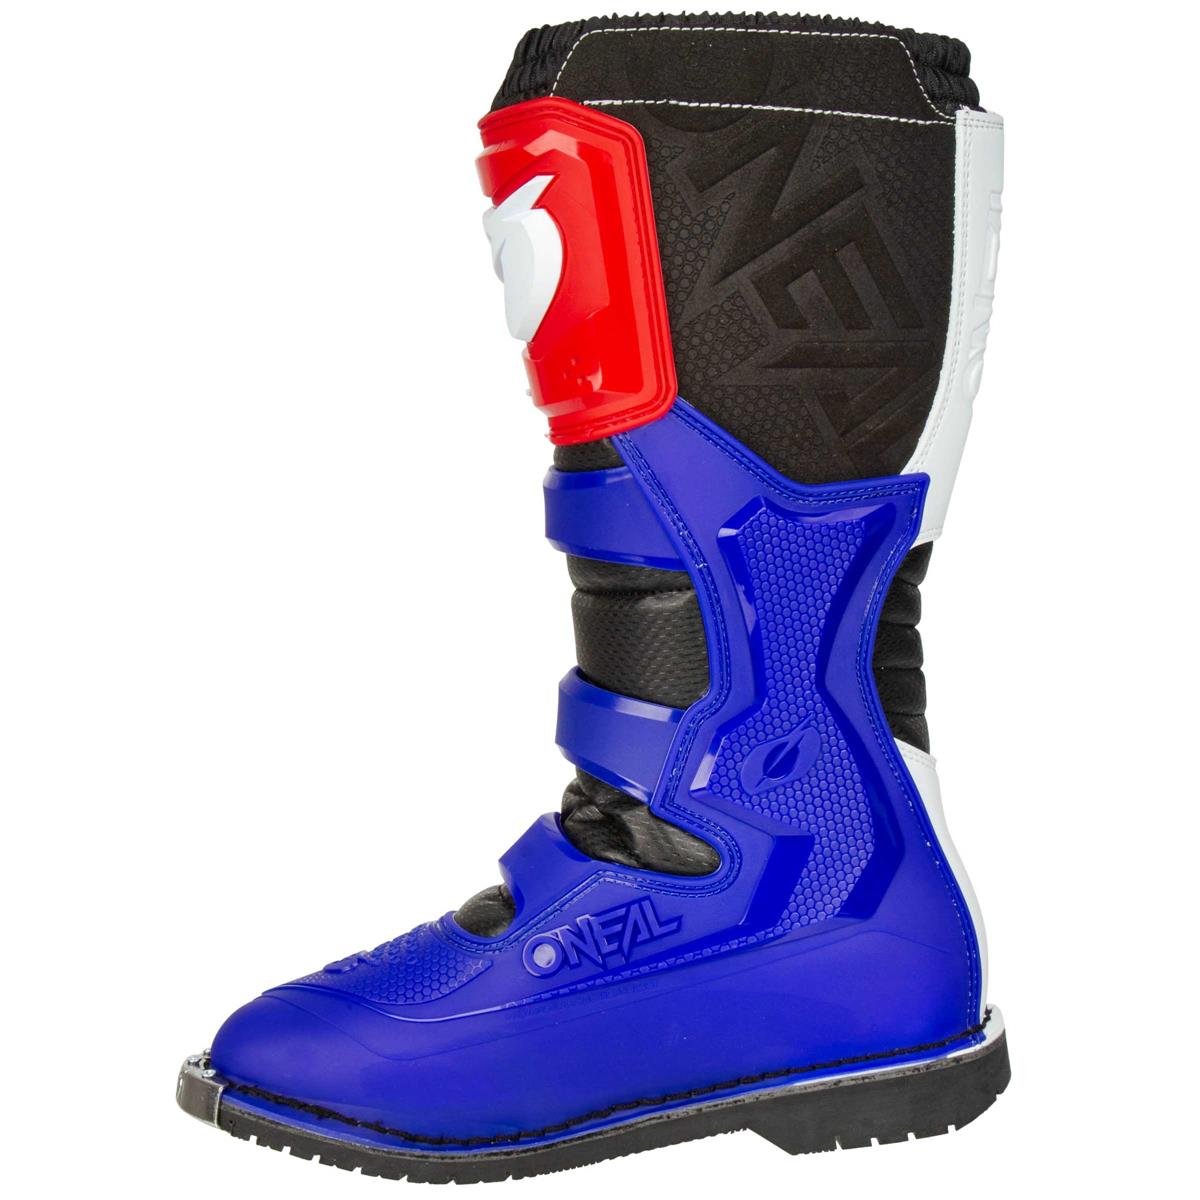 ONeal Rider Motocross Stiefel weiss rot blau Enduro boot Quad MX 